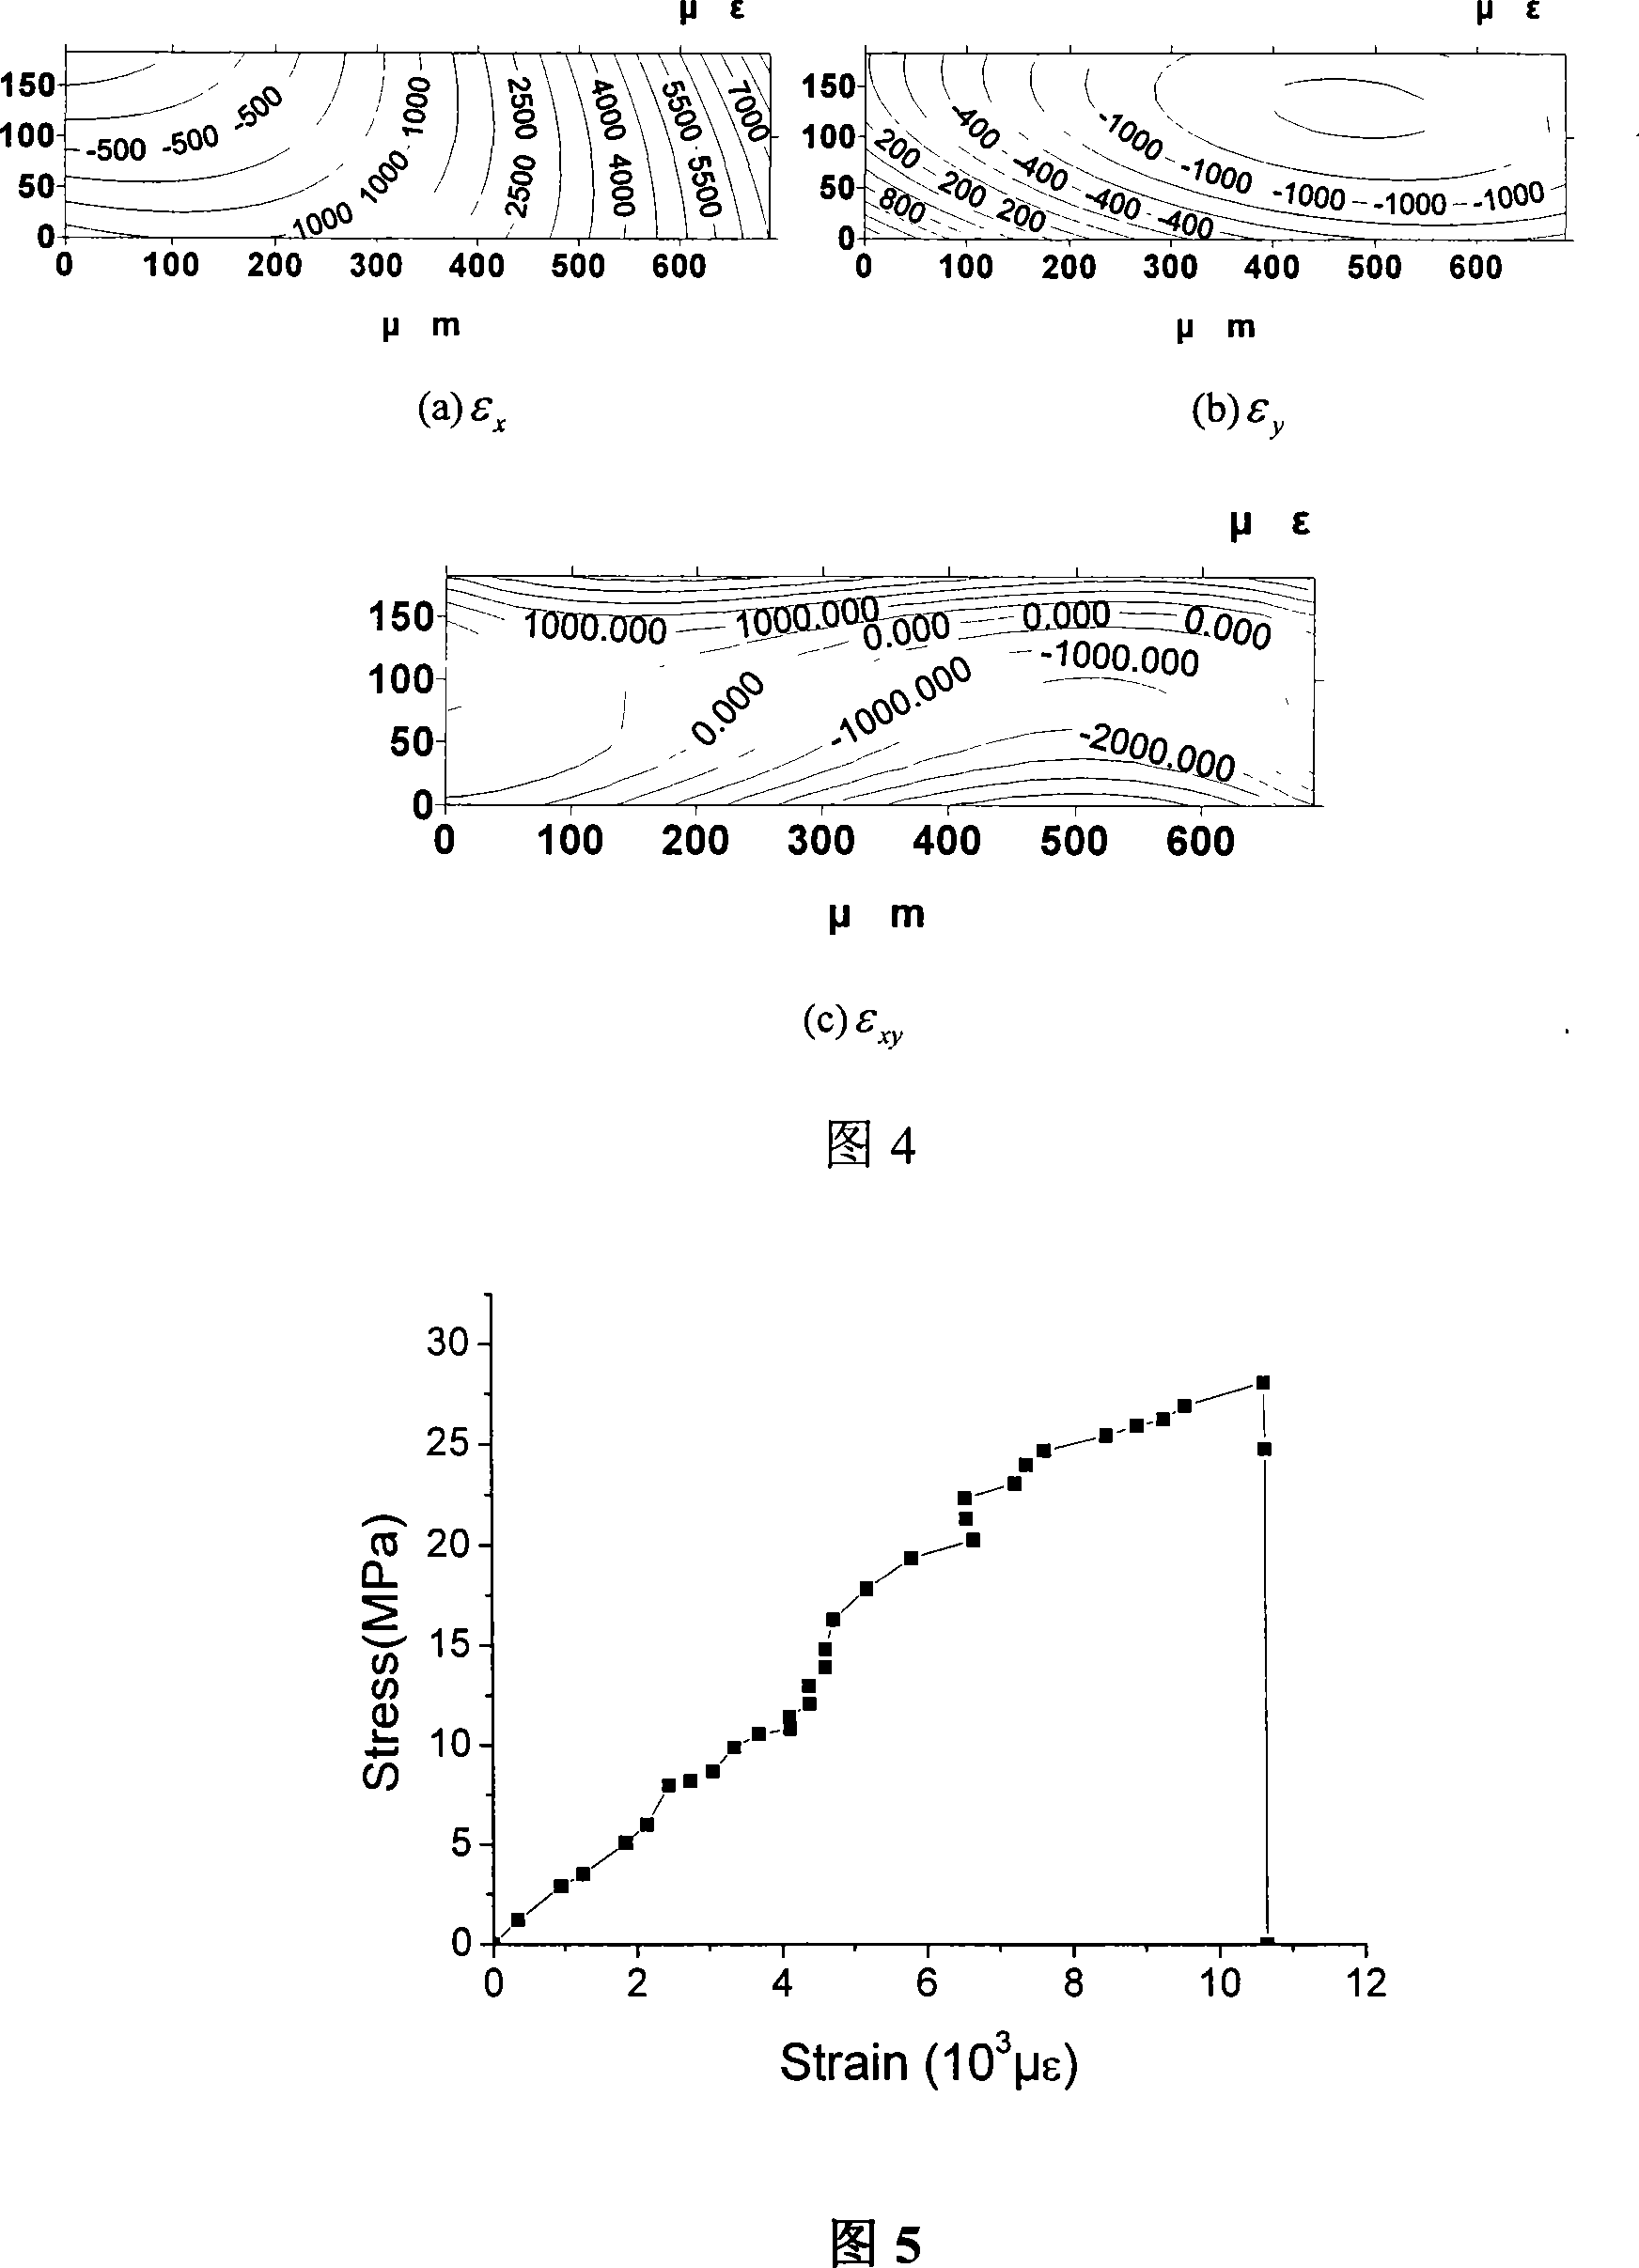 Extract and mechanical properties measurement method of bone trabecula and measurement mechanism